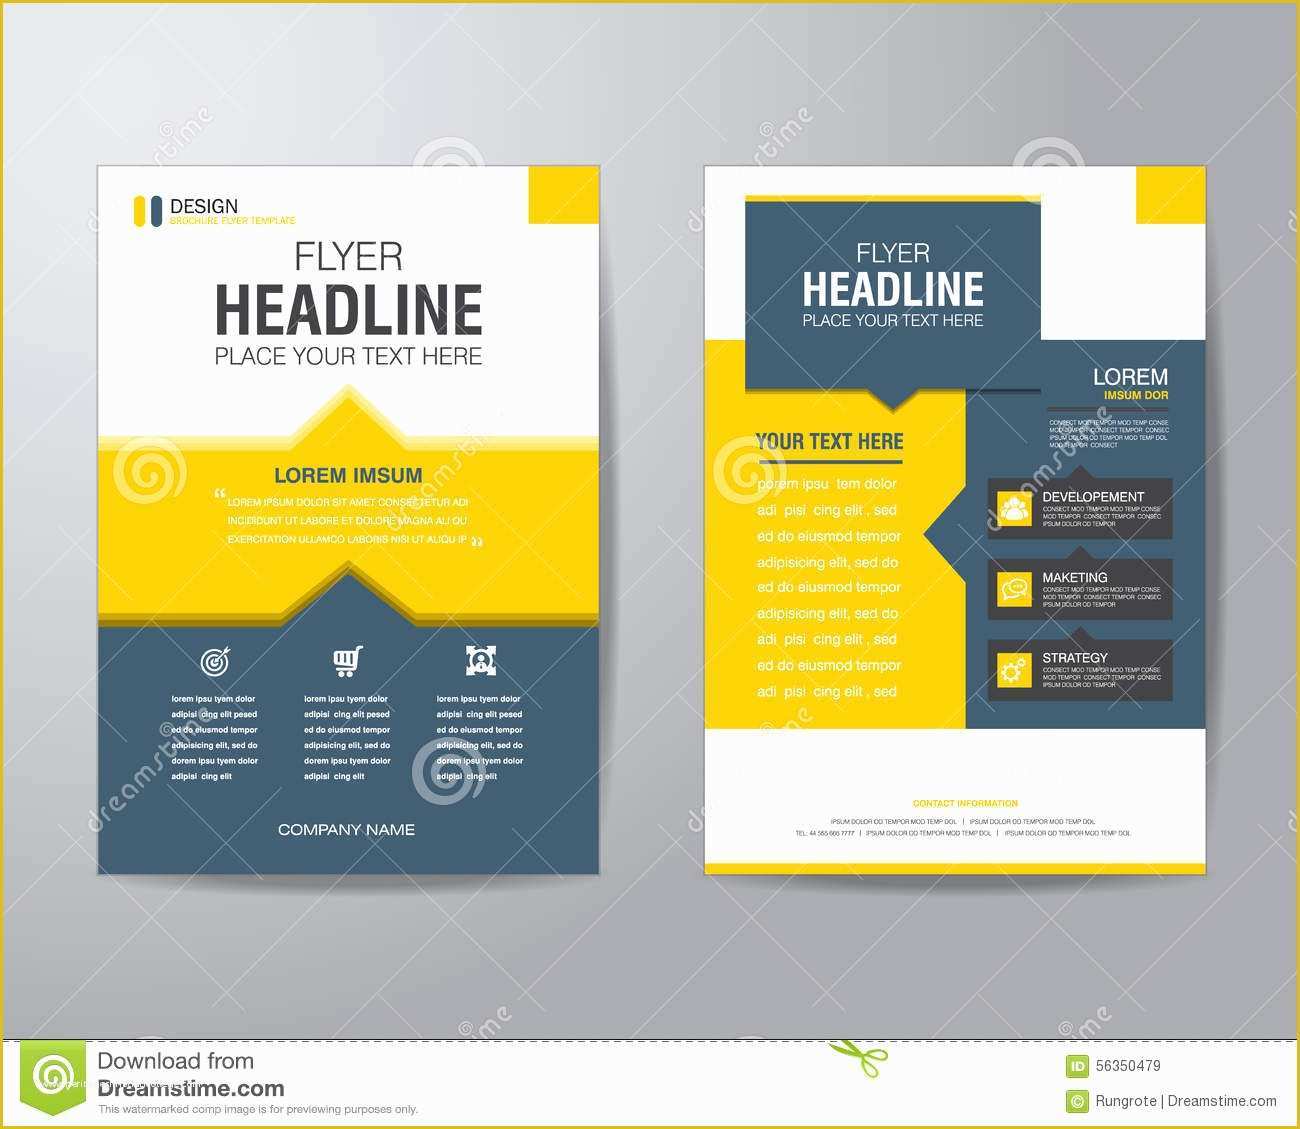 Remodeling Flyer Templates Free Of Business Brochure Flyer Design Layout Template In A4 Size